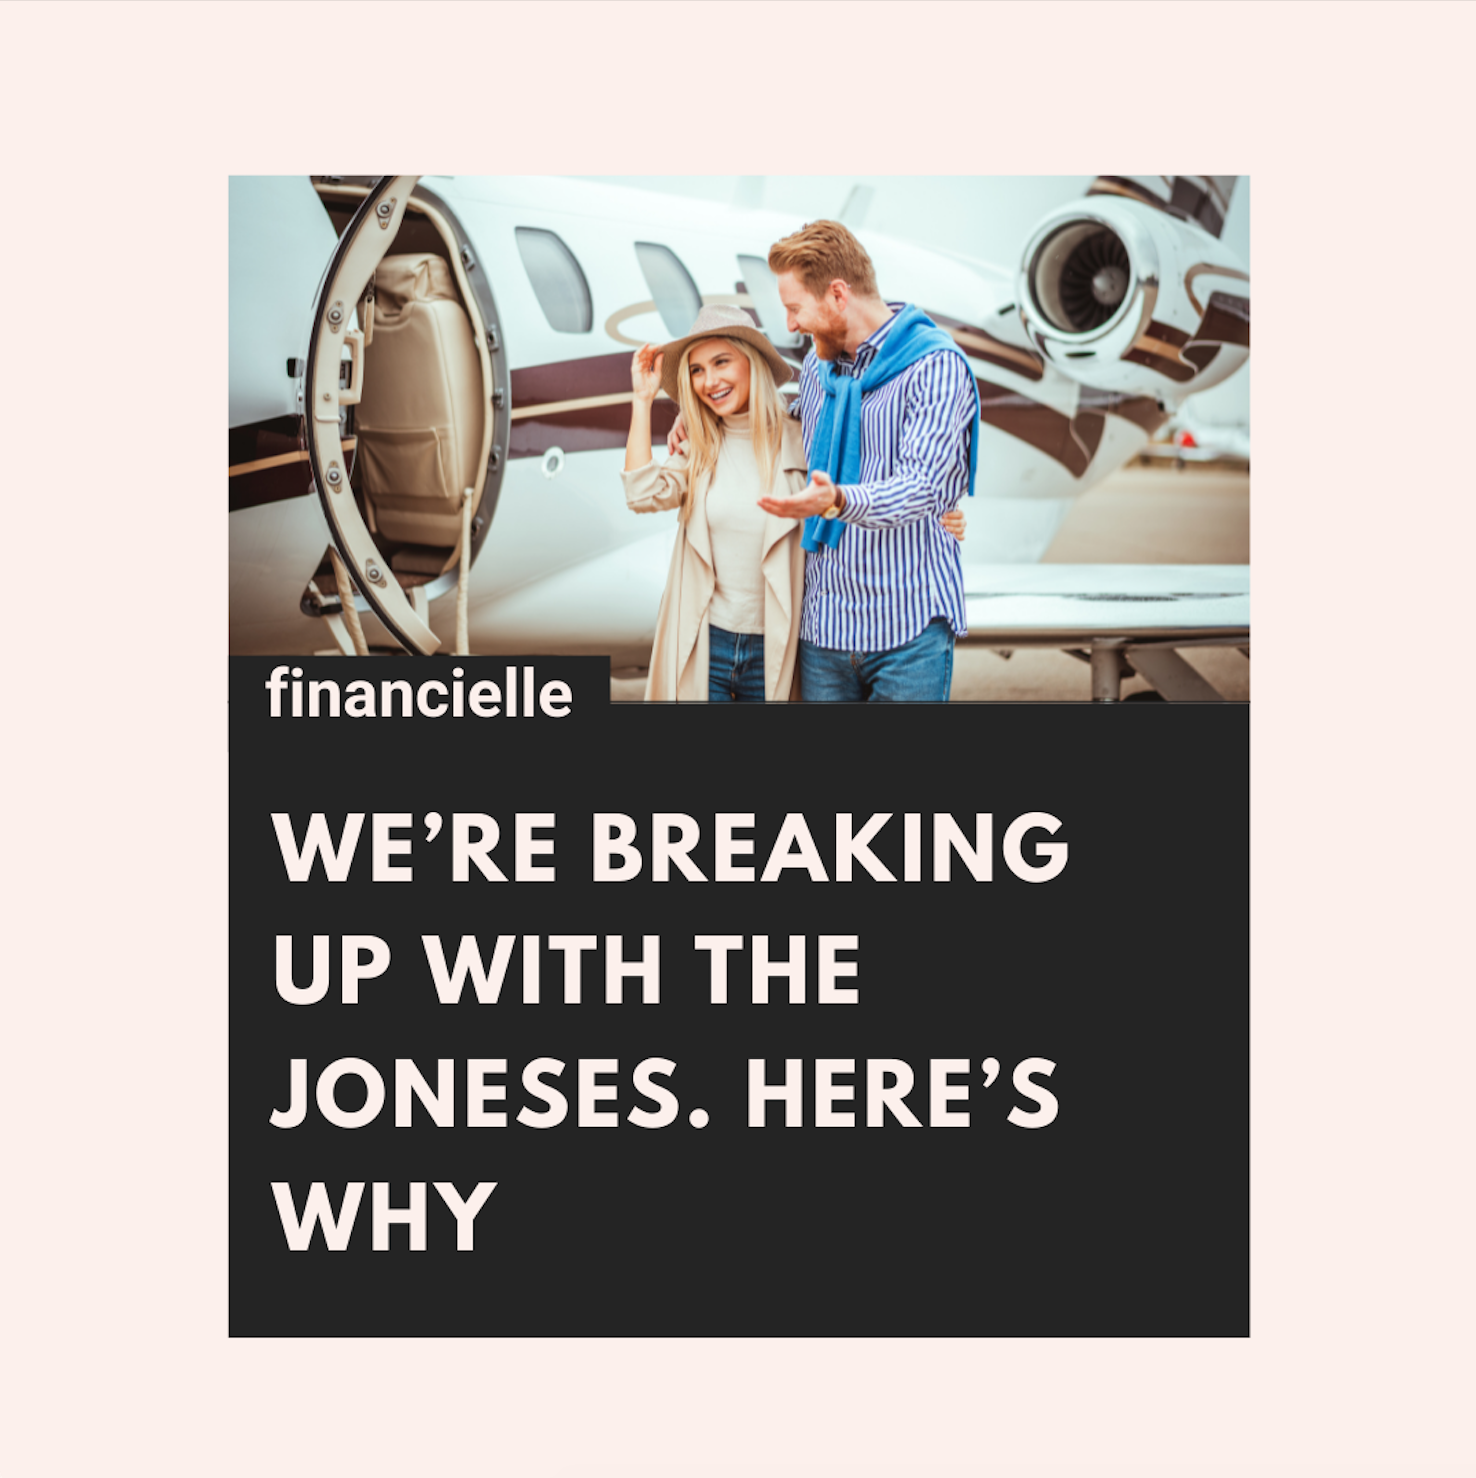 keeping up with the joneses